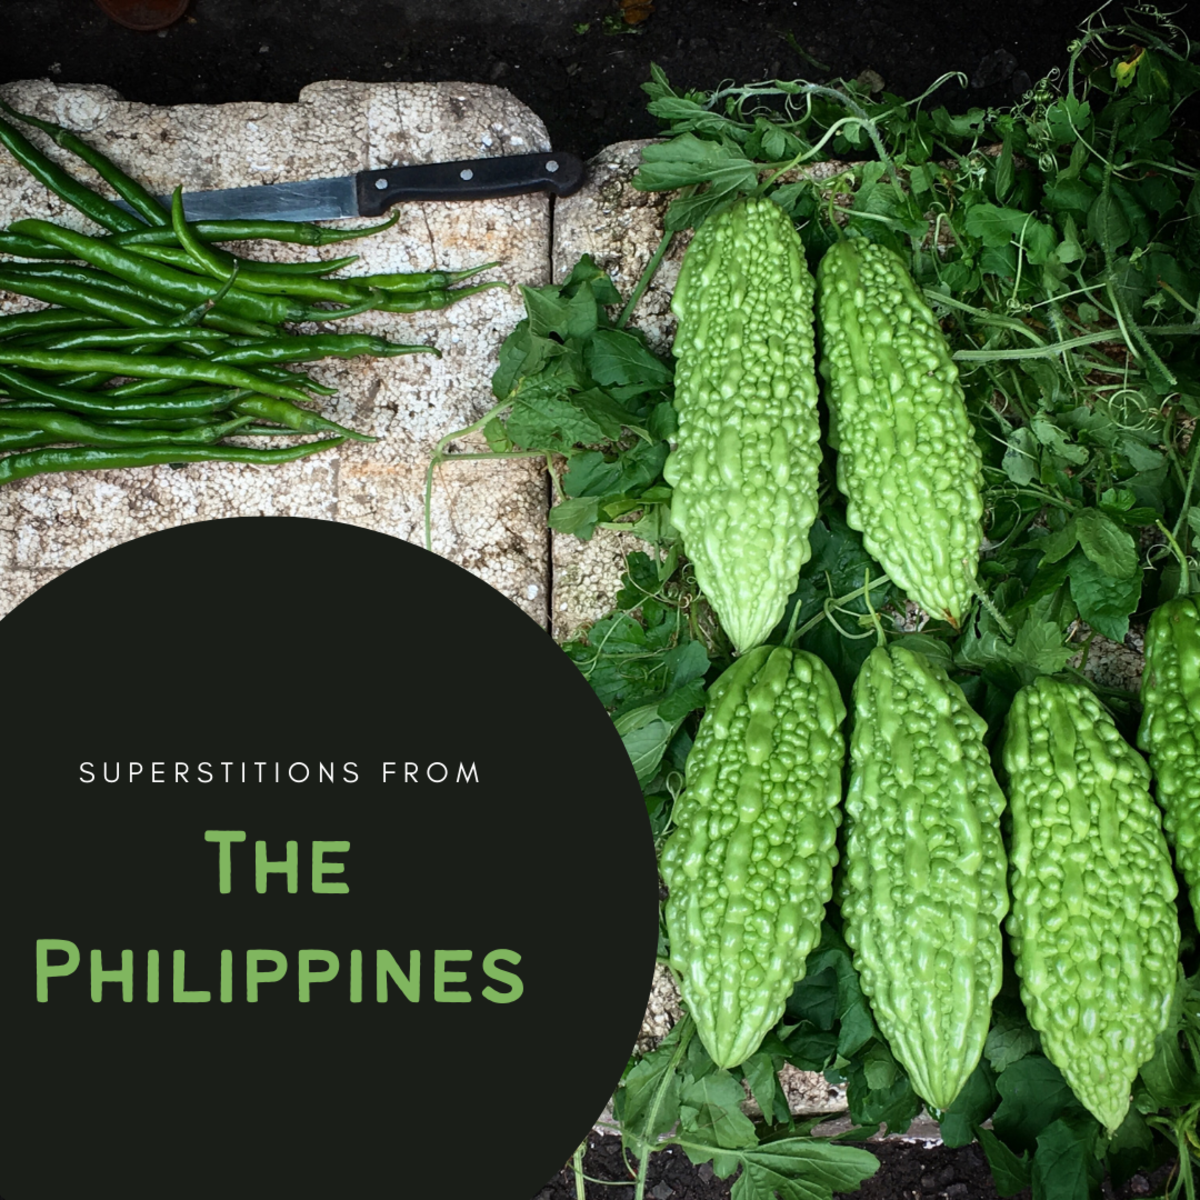 17 Common Filipino Superstitions You Need to Know